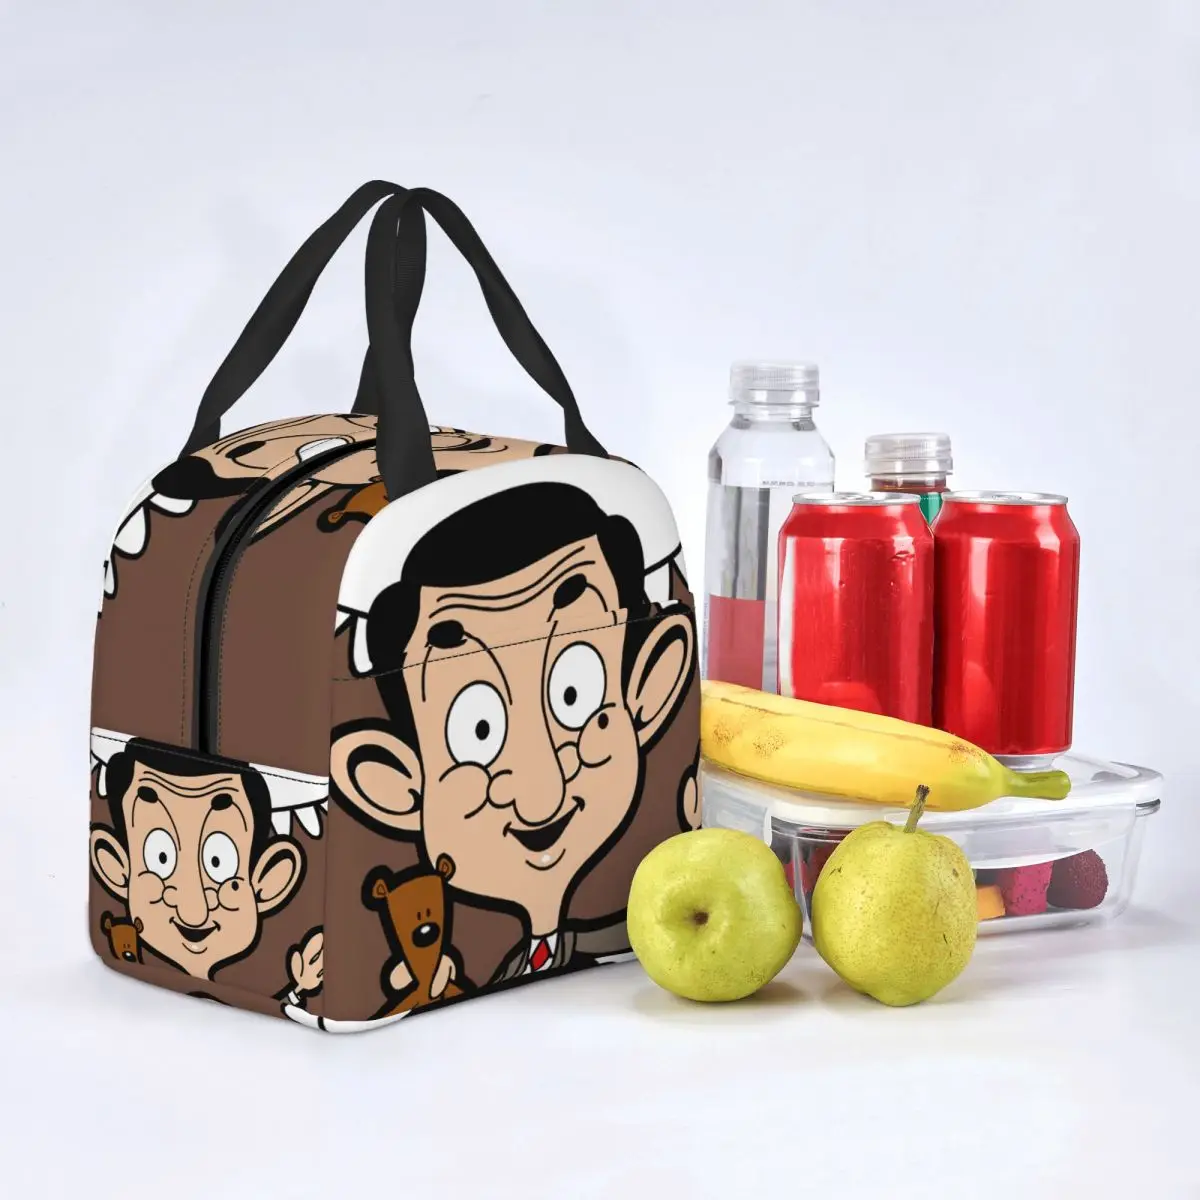 Mr Bean British Comedy Cartoon Tv Resuable Lunch Boxes Women Waterproof Cooler Thermal Food Insulated Lunch Bag Children Student images - 6